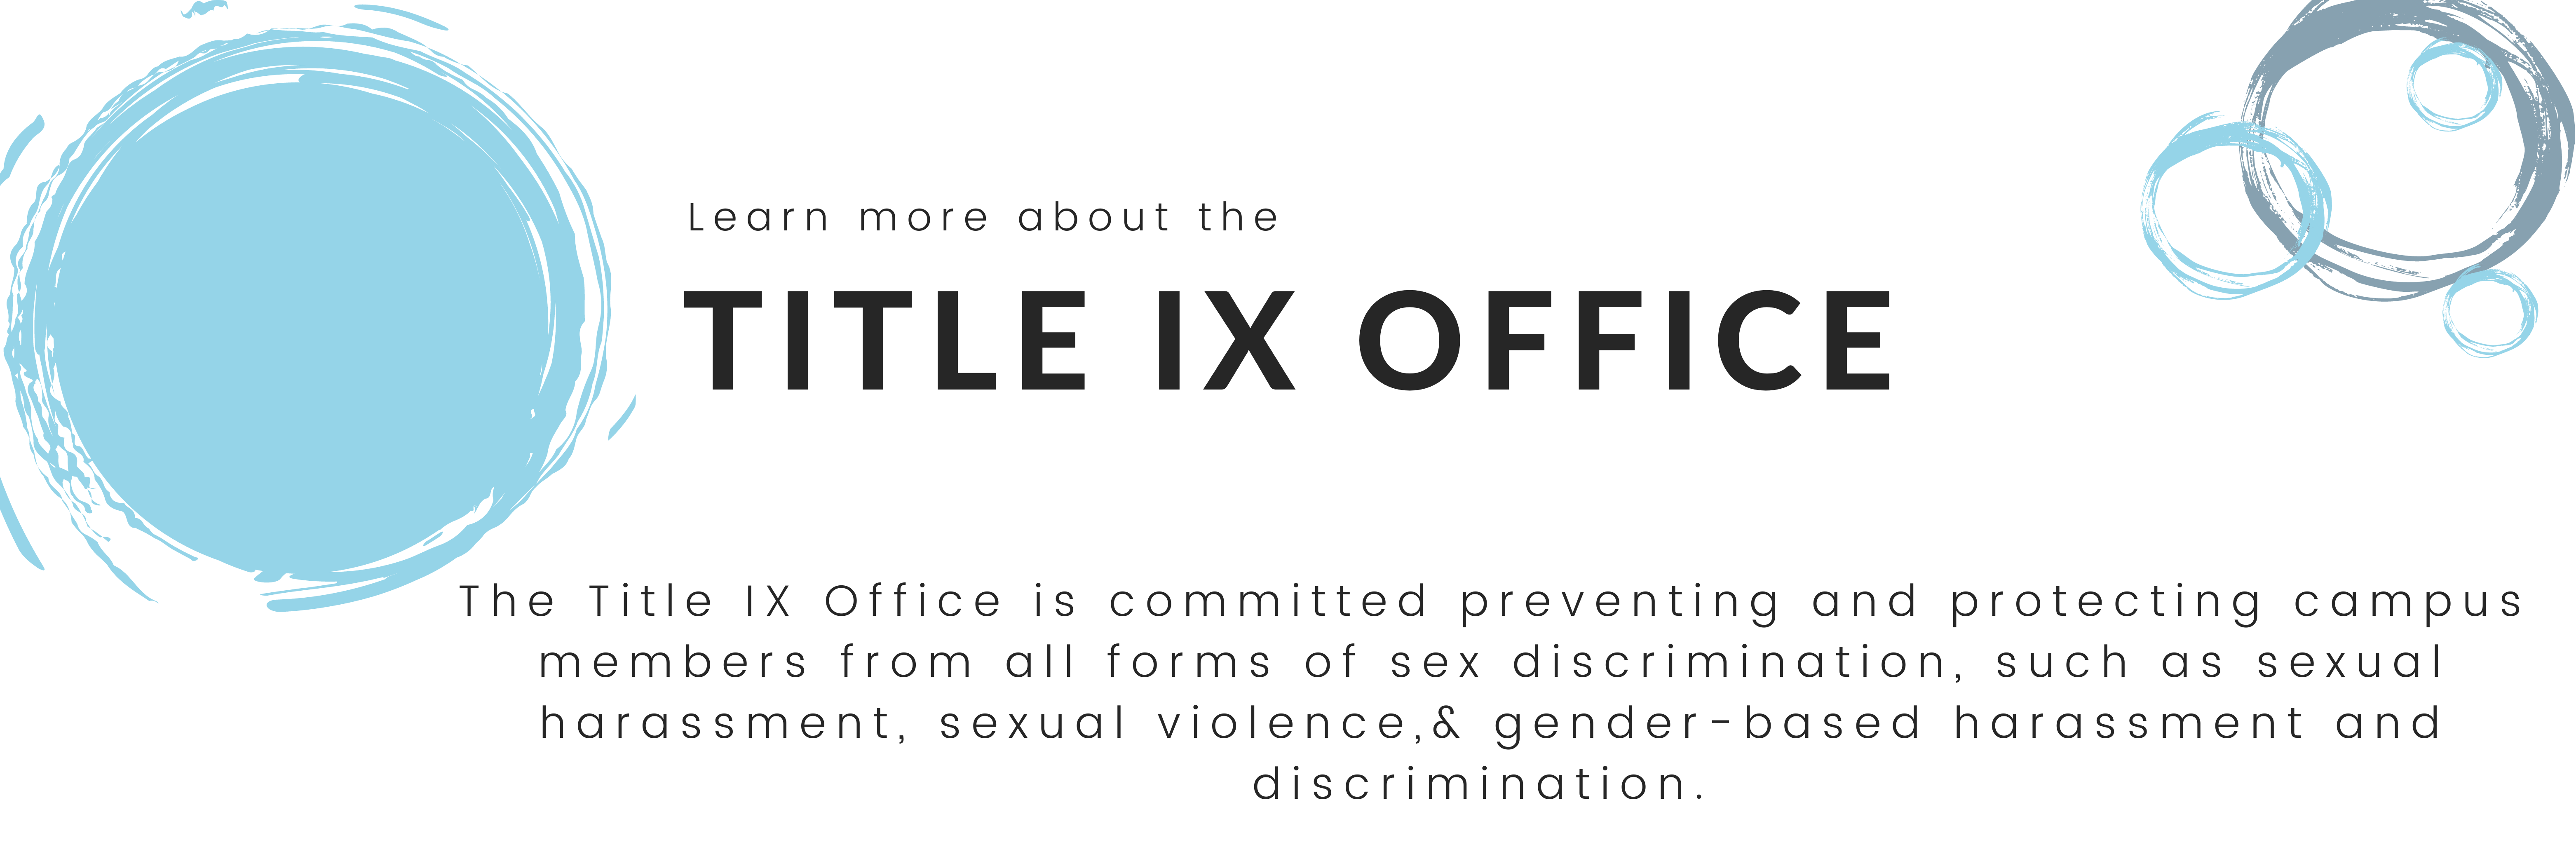 Learn more about the Title IX Office. The Title IX Office is committed preventing and protecting campus members from all forms of sex discrimination, such as:  sexual harassment, sexual violence,& gender-based harassment and discrimination. 